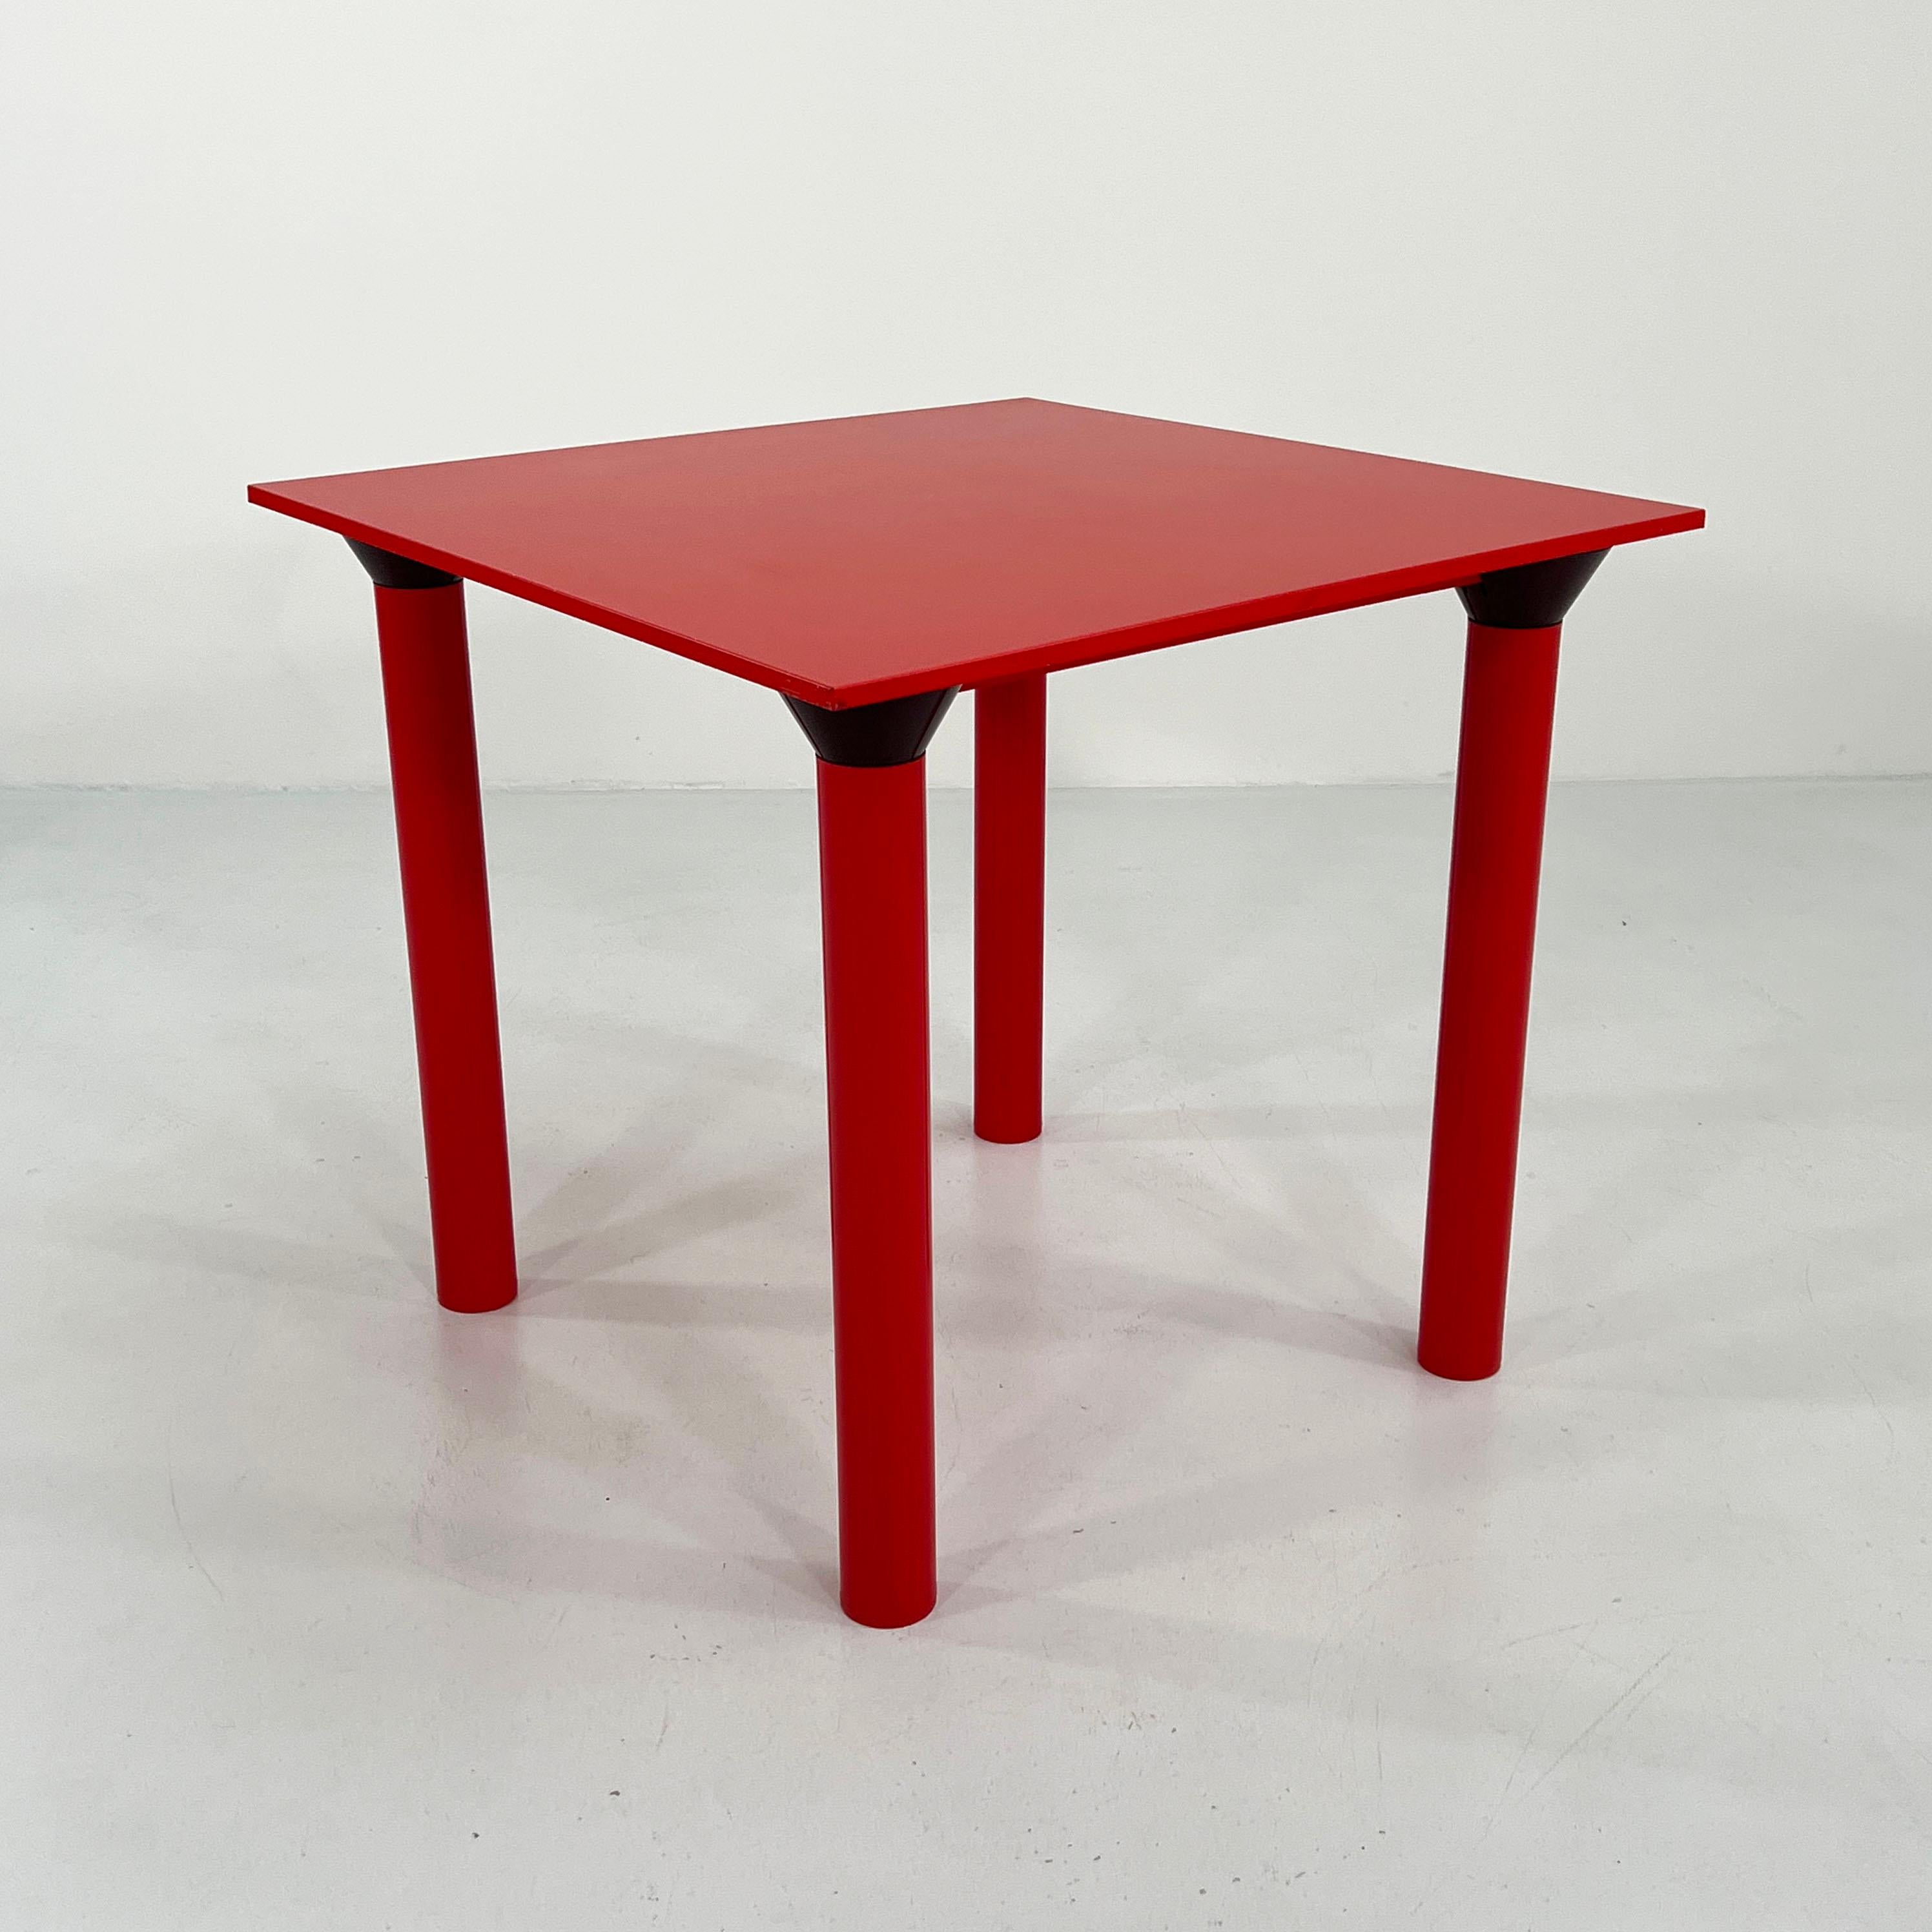 Late 20th Century Red Dining Table Model 4300 by Anna Castelli Ferrieri for Kartell, 1970s